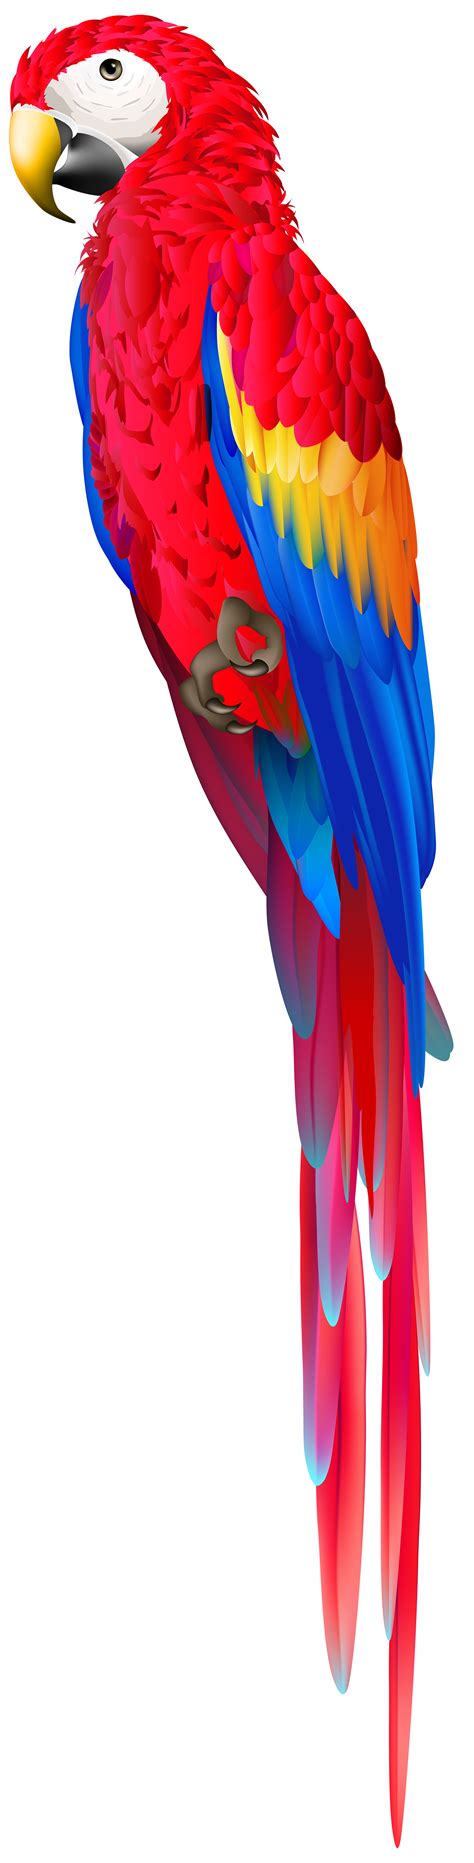 Red Parrot Png Clip Art Image Gallery Yopriceville High Quality